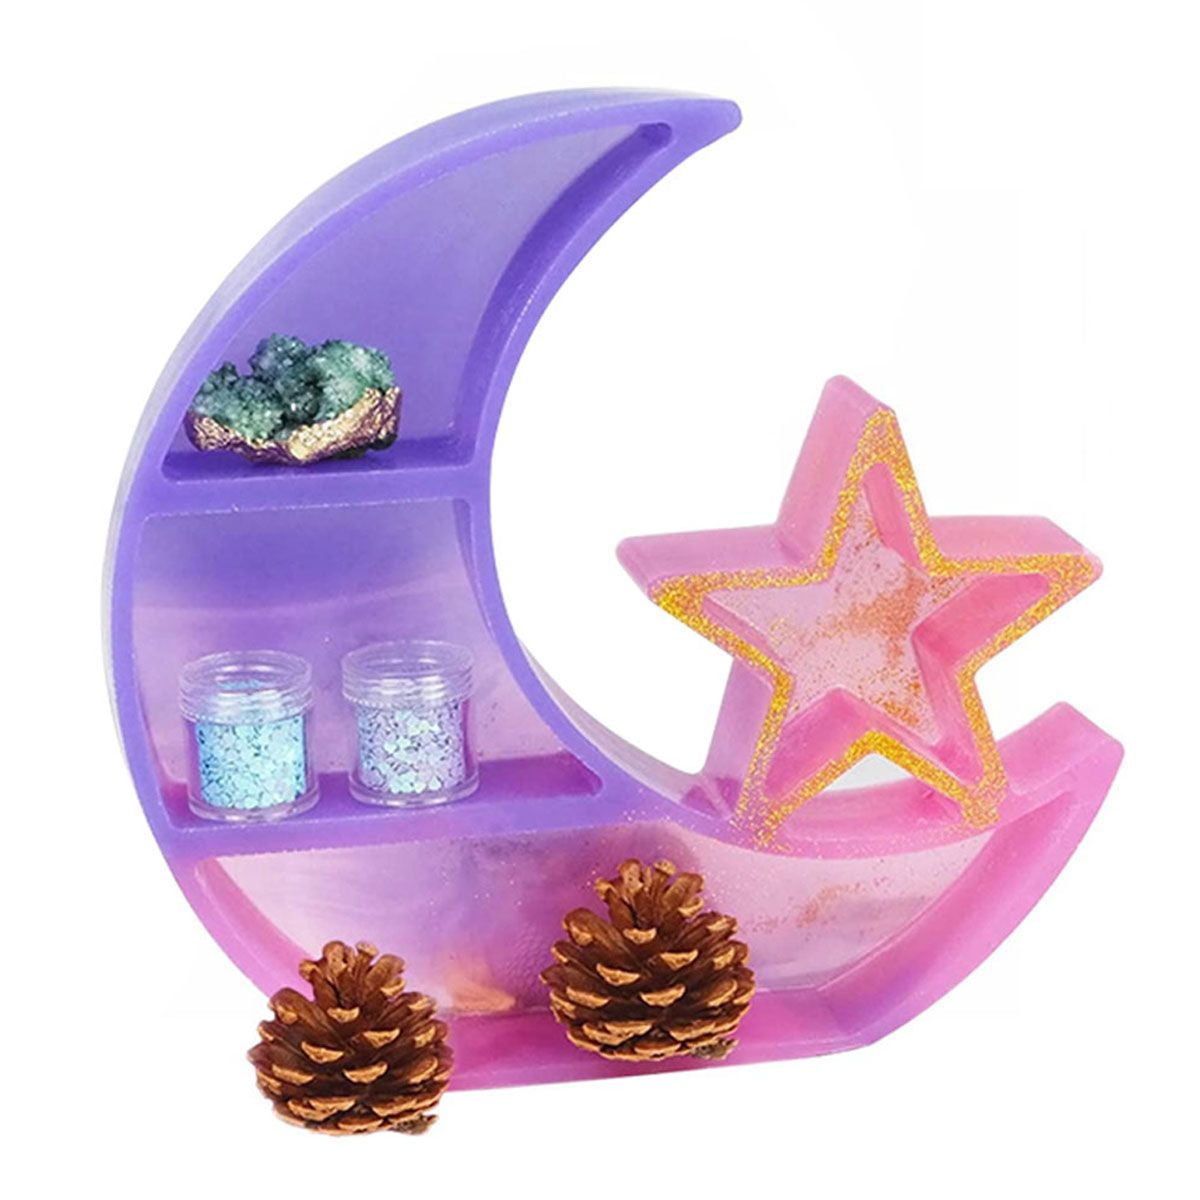 Christmas mould Christmas evil girls silicone ornaments mould|mould only for resin crafts Made to order